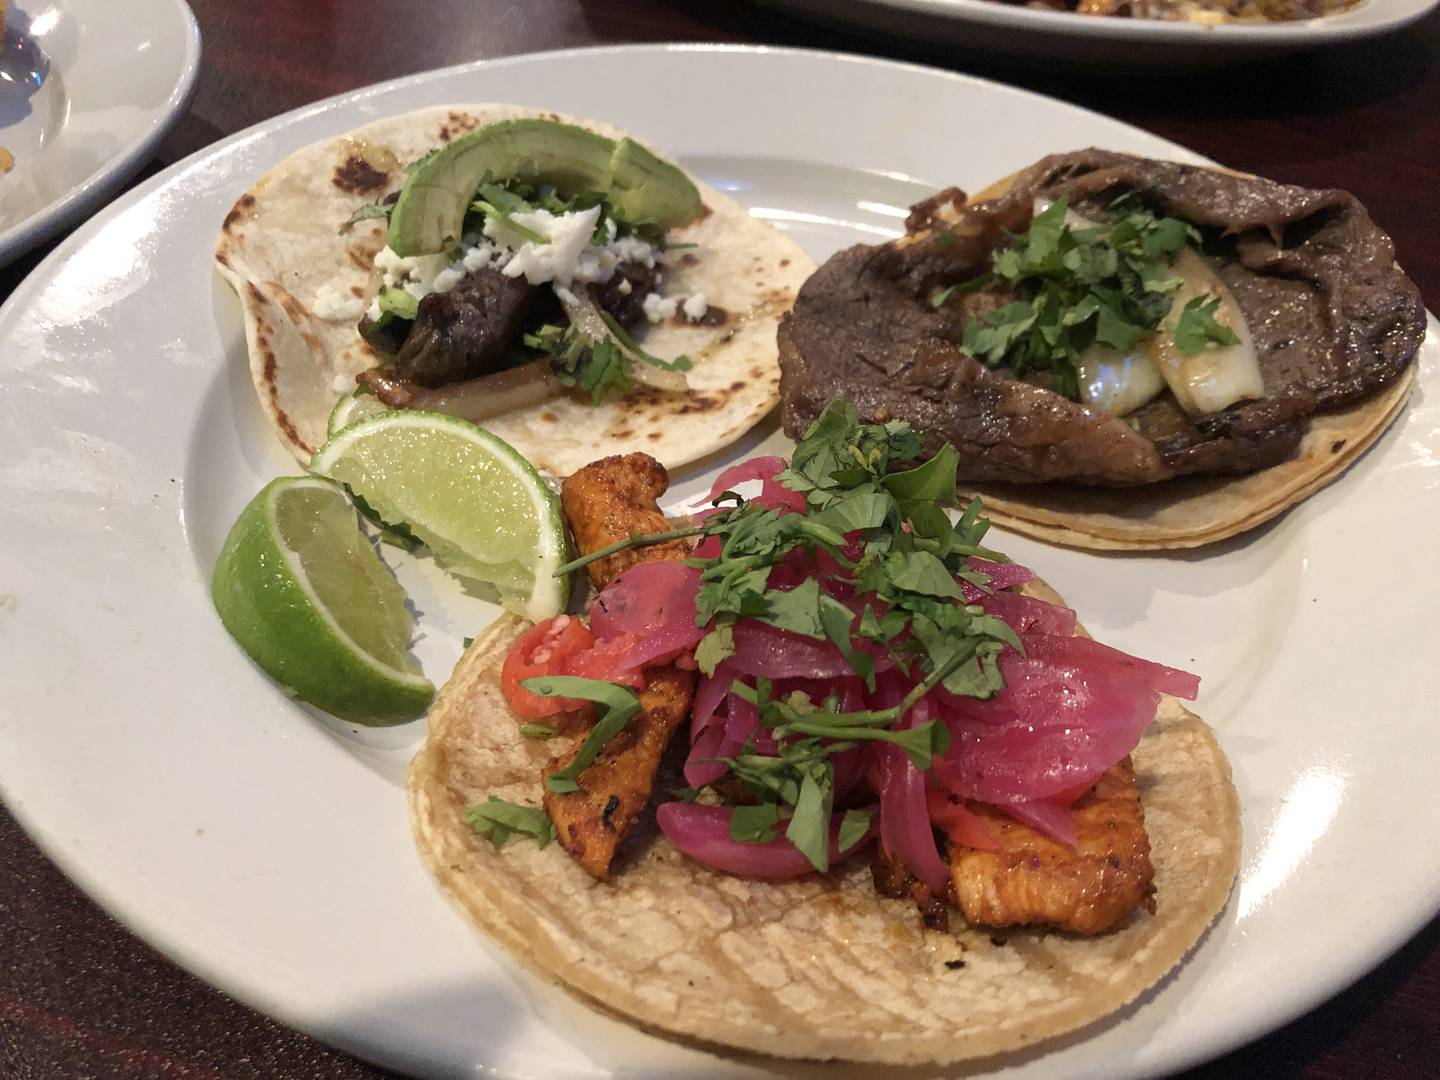 No Manches! Mexican Grill, 140 N Western Avenue (Route 31), in Carpentersville, offers fresh and authentic Mexican food. The Mystery Diner and friend at here on Aug. 11, 2022.